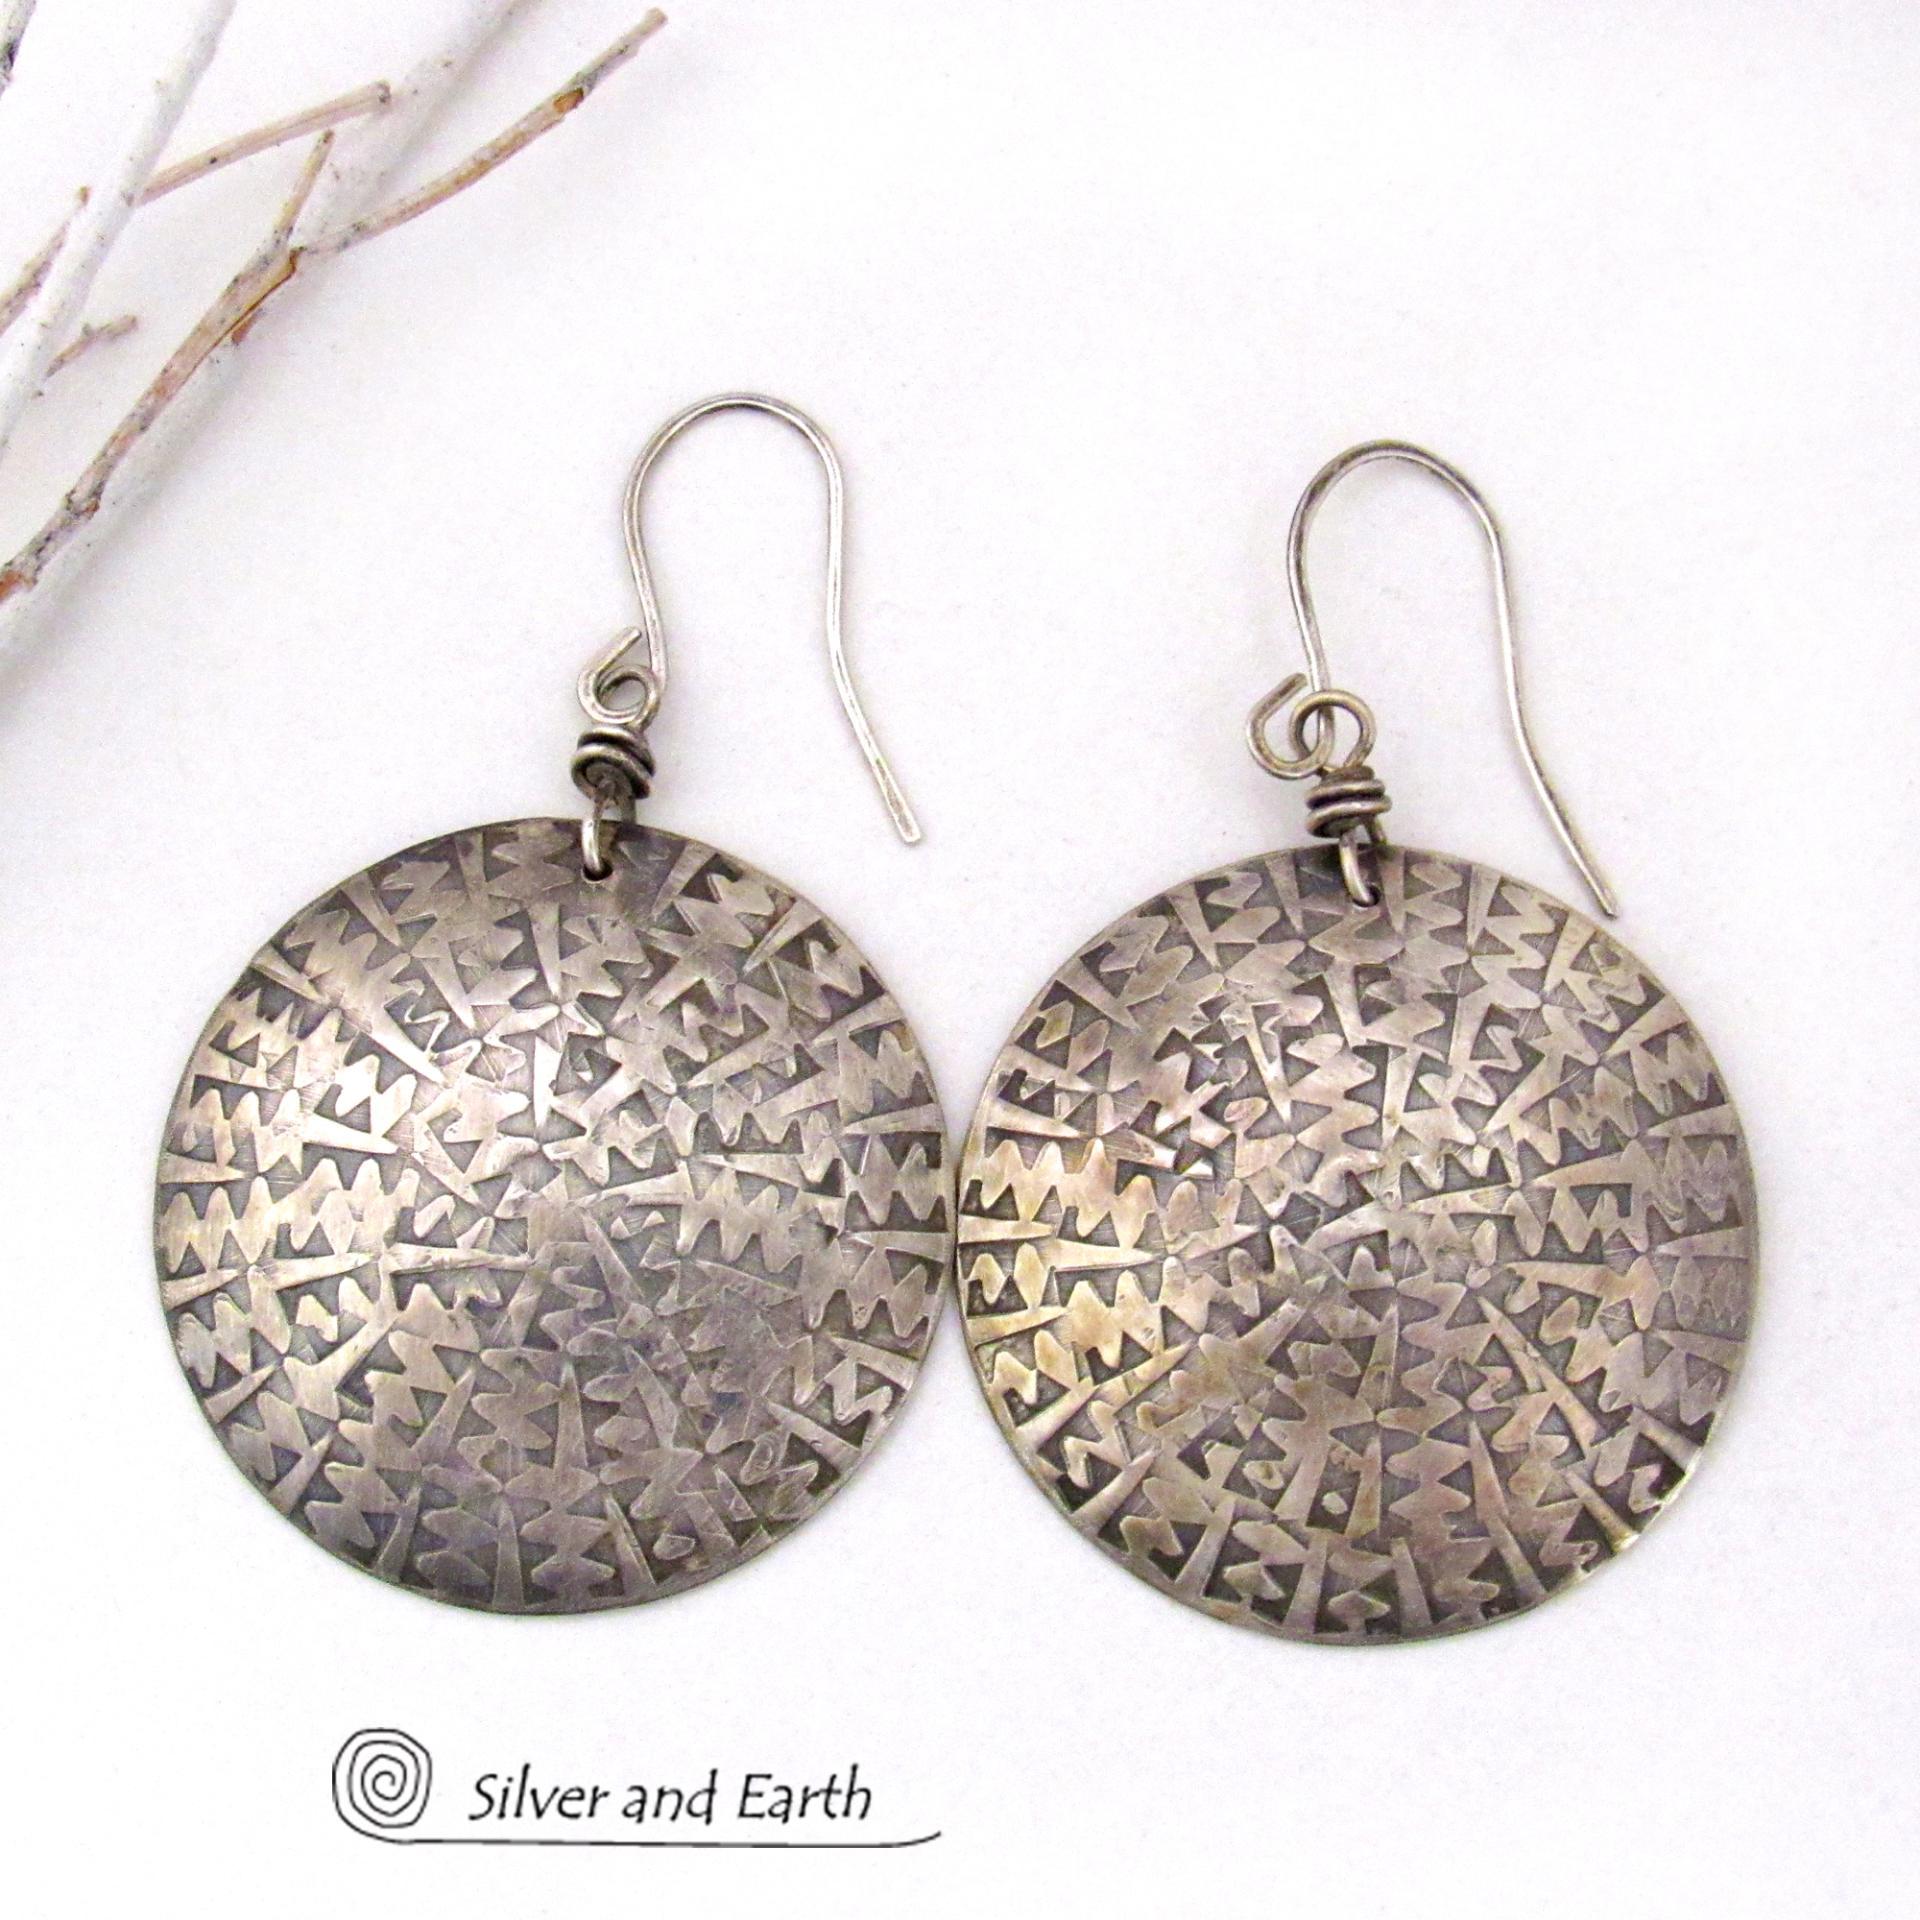 Big Bold Sterling Silver Earrings with Hand Stamped Texture - Artisan Handcrafted Modern Silver Jewelry